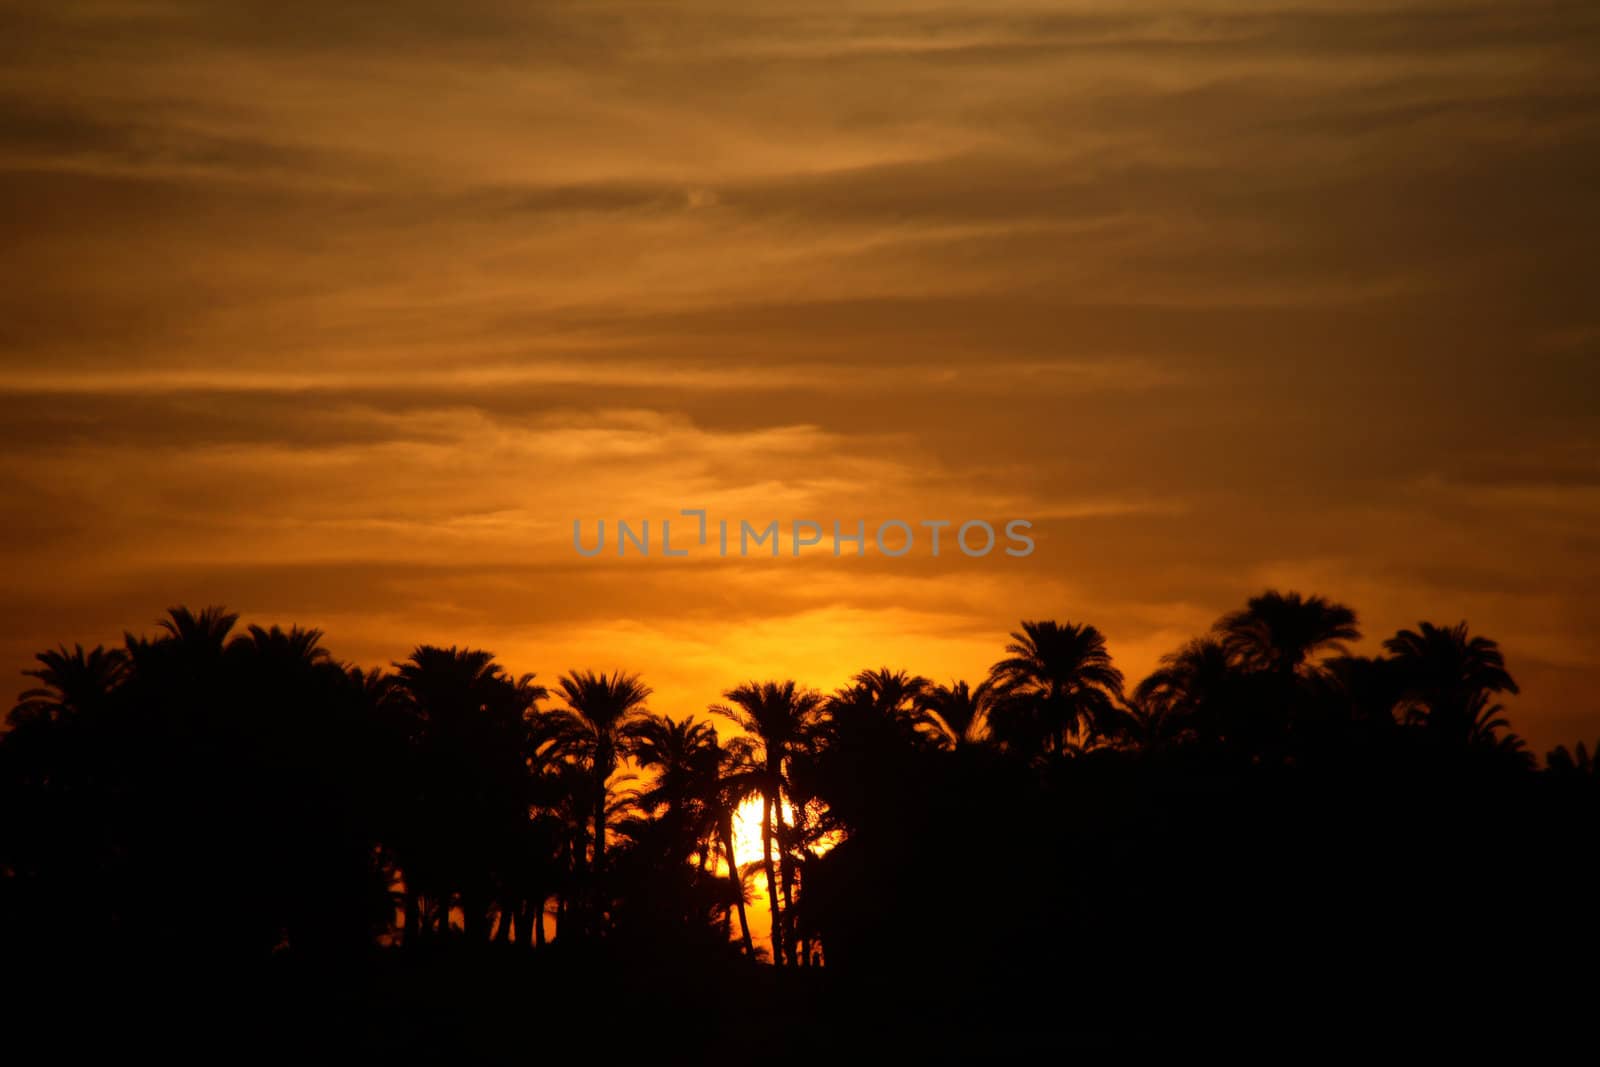 Sunset with Palm Trees by Daniel_Wiedemann